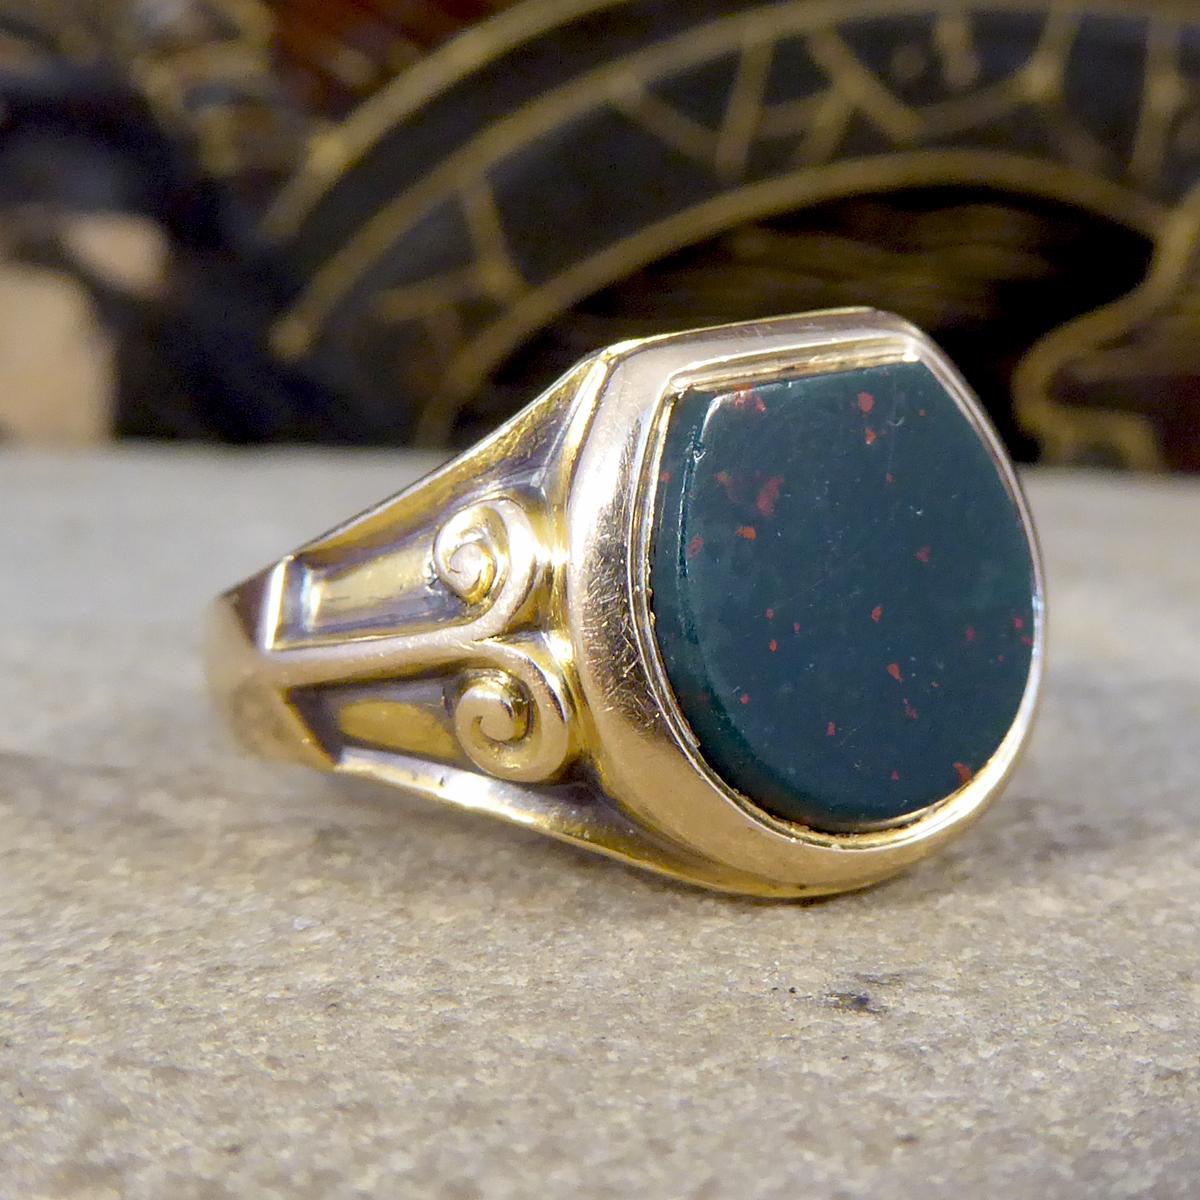 Suitable for both men and women, would look great on either gender. This Bloodstone signet ring has been crafted in 1921 with very clear hallmarks from 1921 Birmingham. Created in 15ct Yellow Gold it would make the perfect gift and keepsake forever.